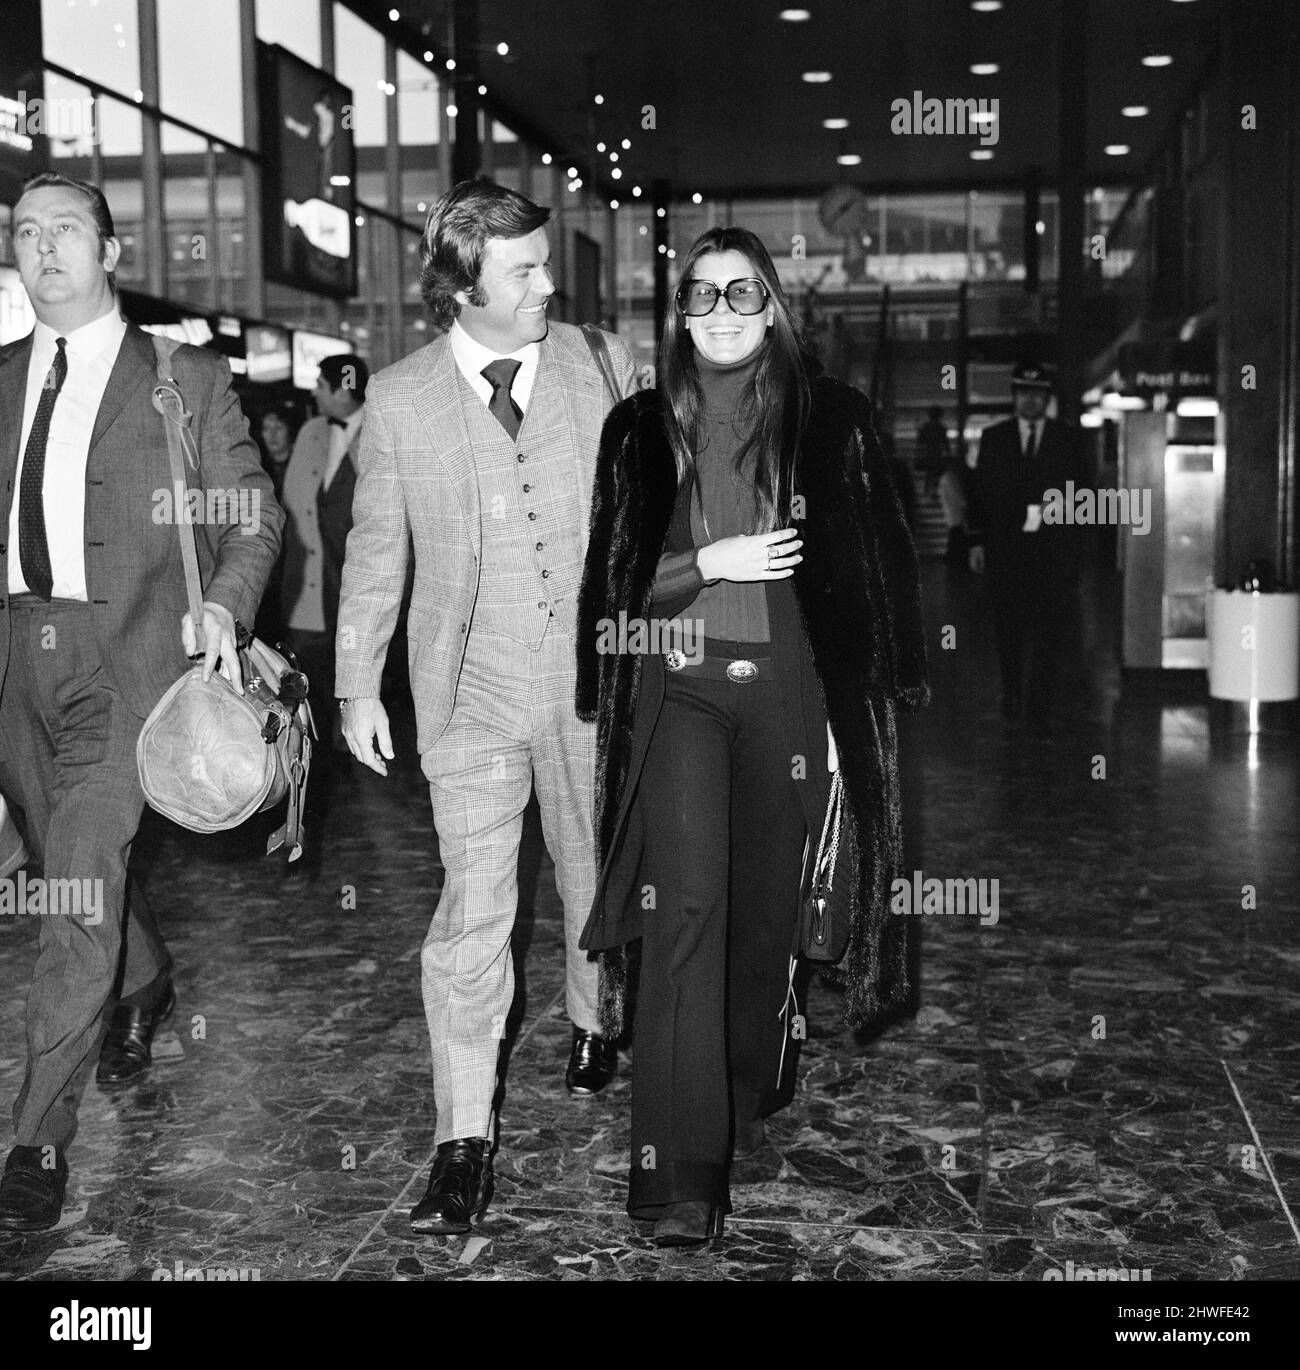 Robert Wagner and Tina Sinatra left Heathrow Airport hand in hand for Los Angeles today. They have been here and in Milan for several days on a private visit. Whilst here they watched Frank Sinatra and Bob Hope at the Charity Show at the Festival Hall. 23rd November 1970. Stock Photo